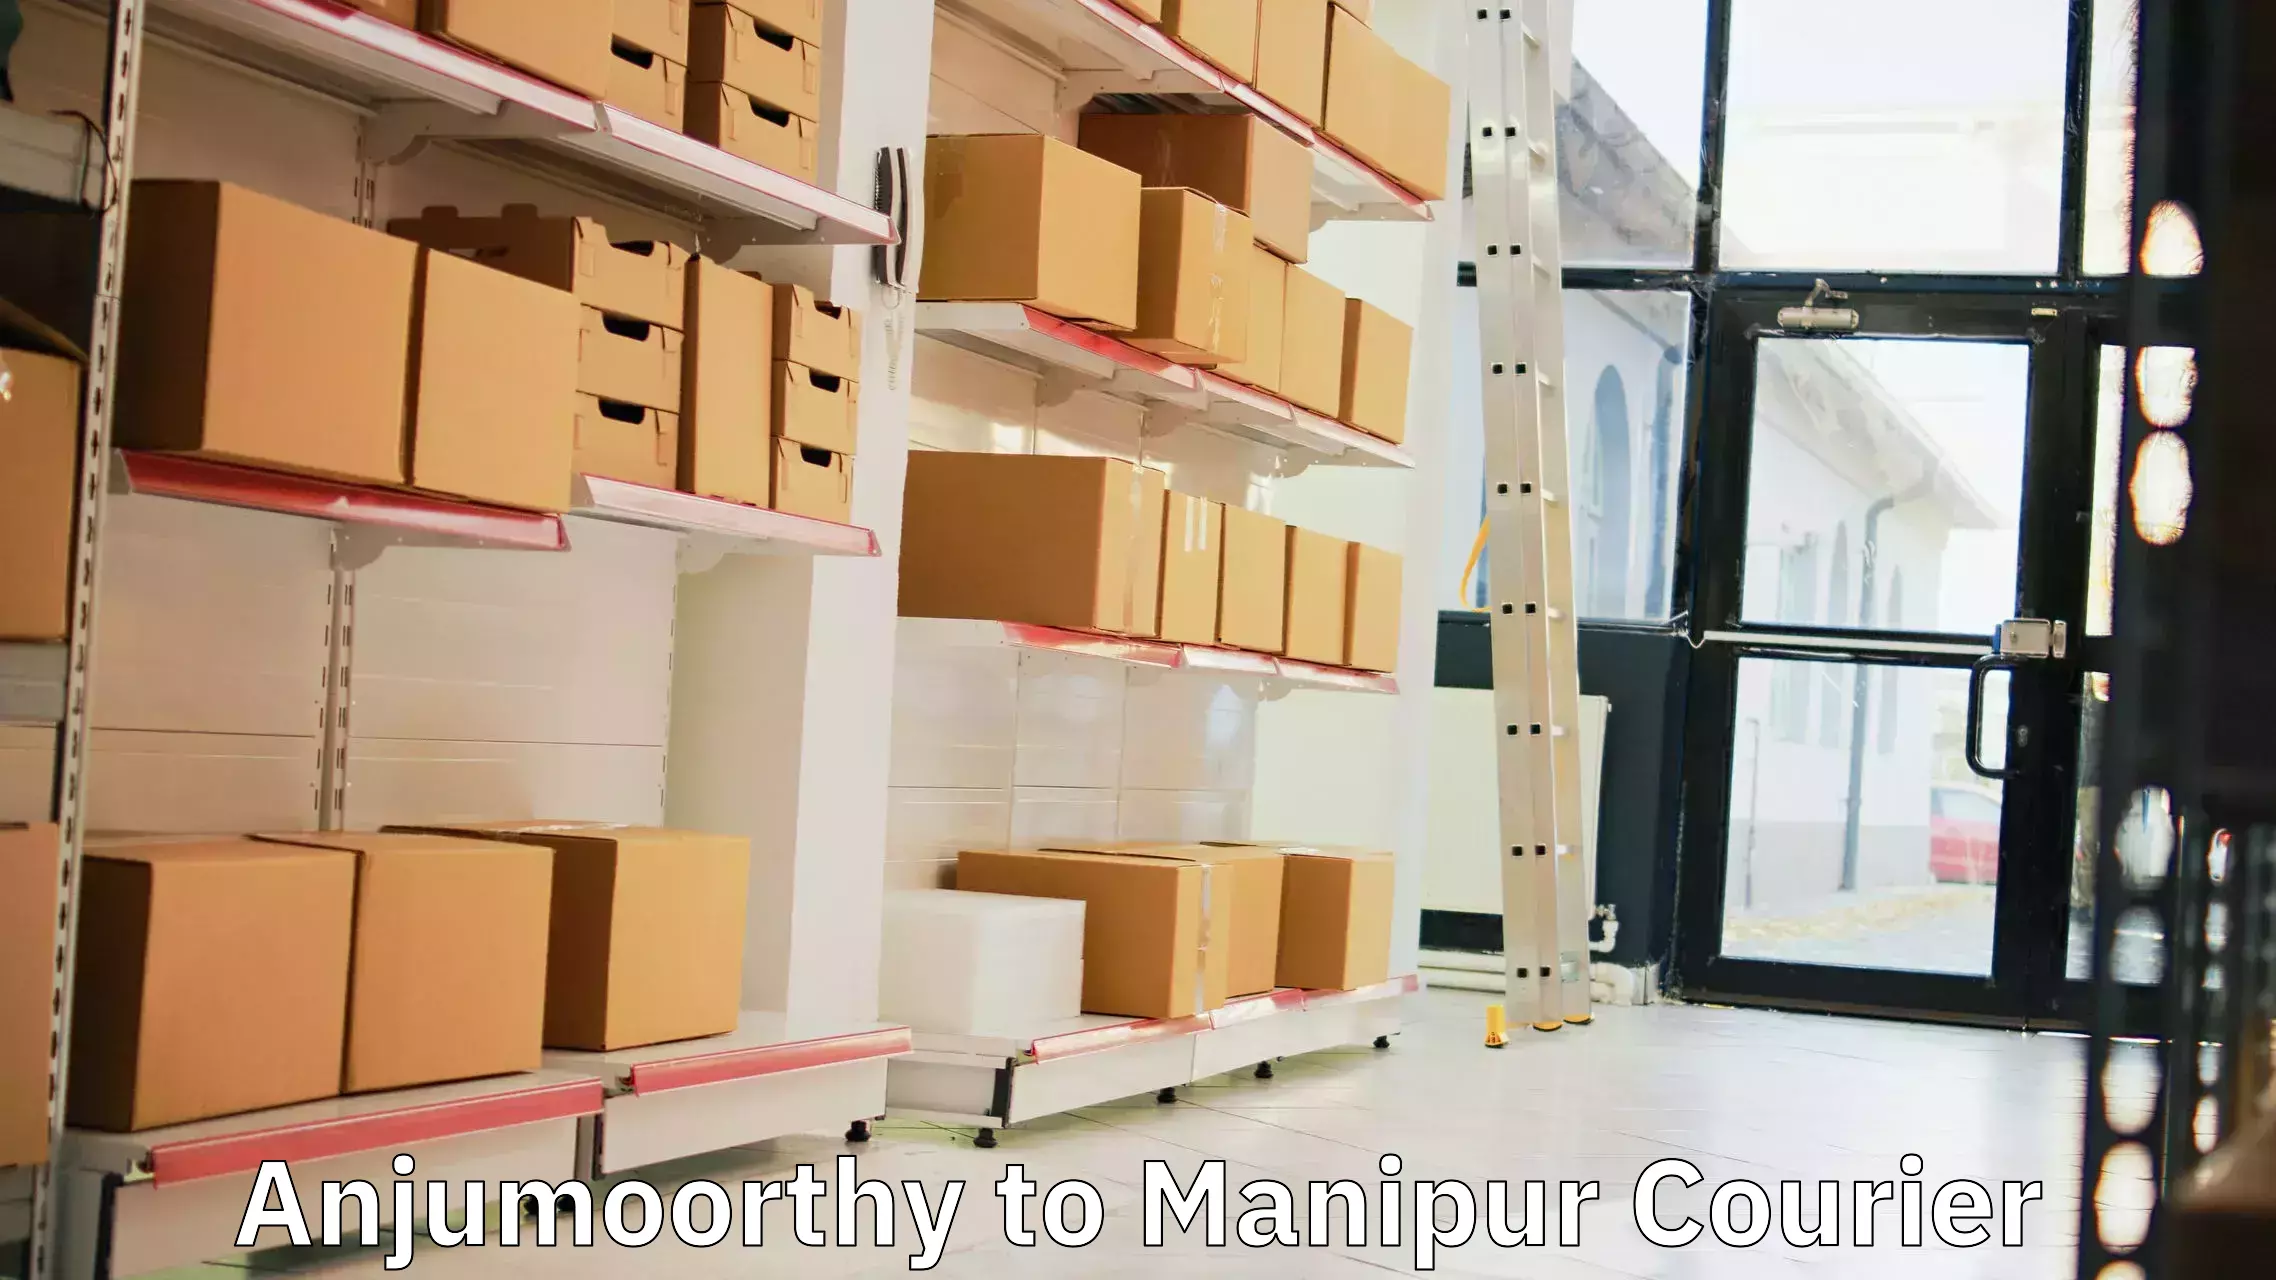 Express package delivery Anjumoorthy to Churachandpur